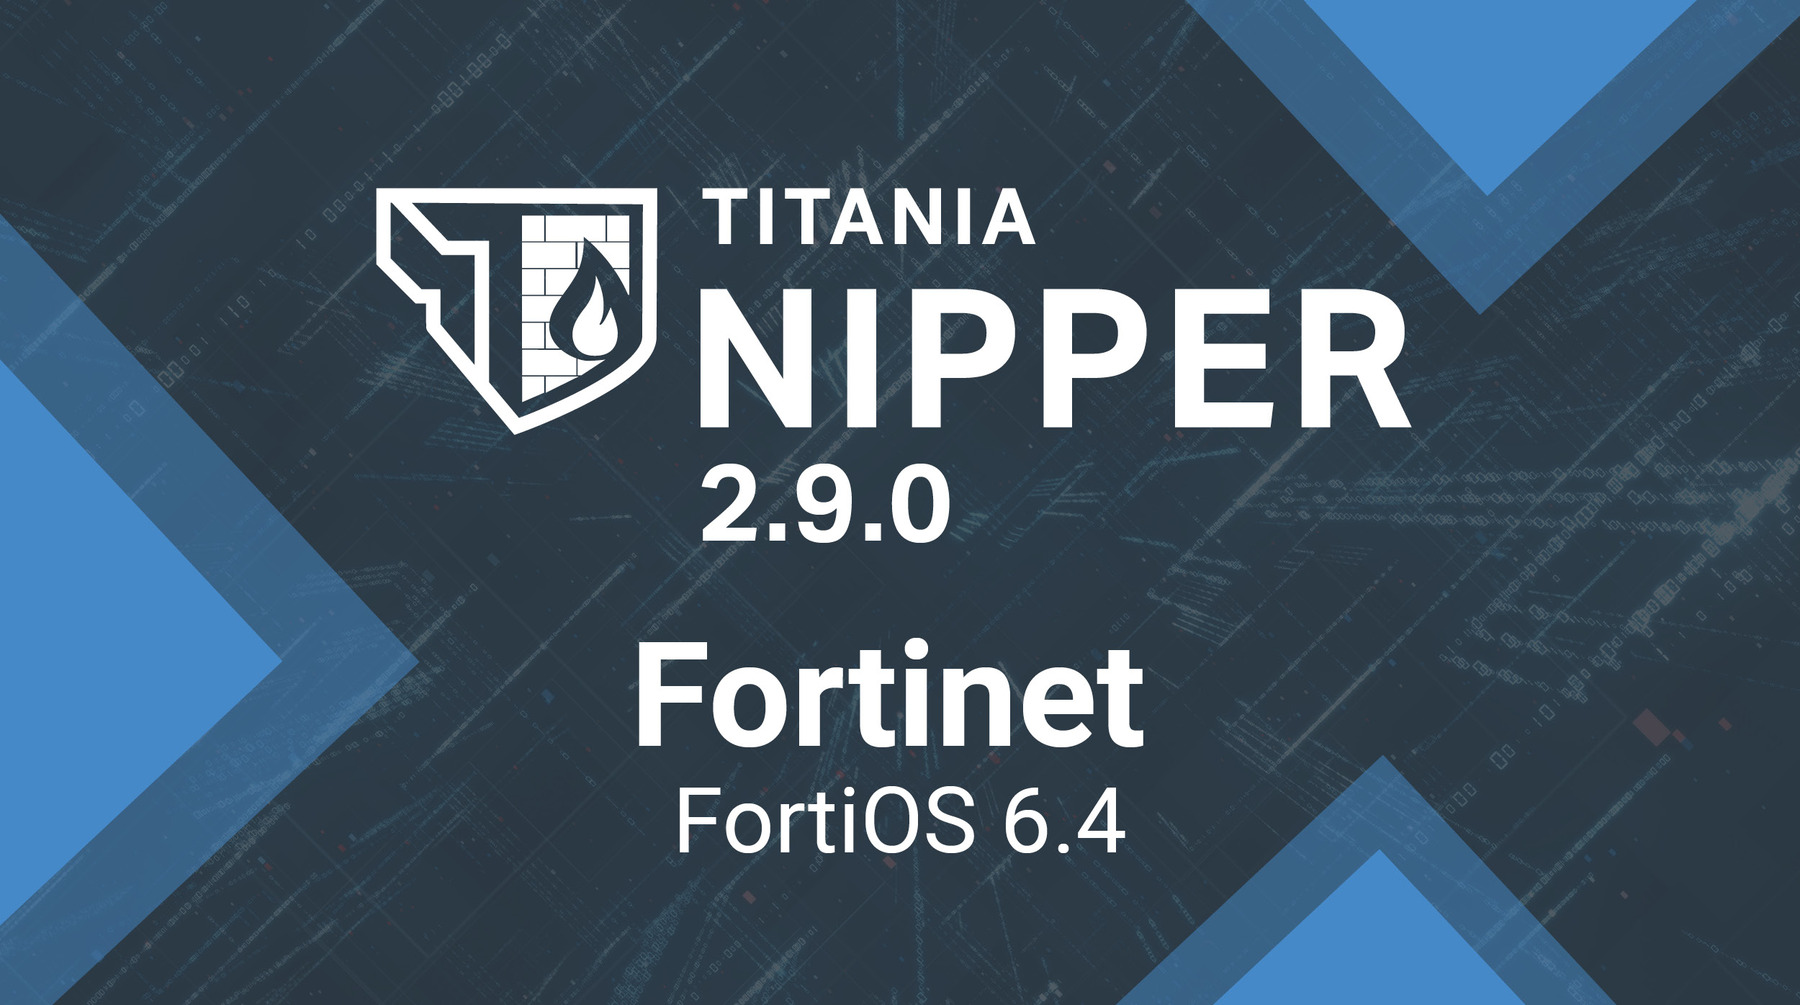 Titania Nipper 2.9.0 supports the latest FortiOS